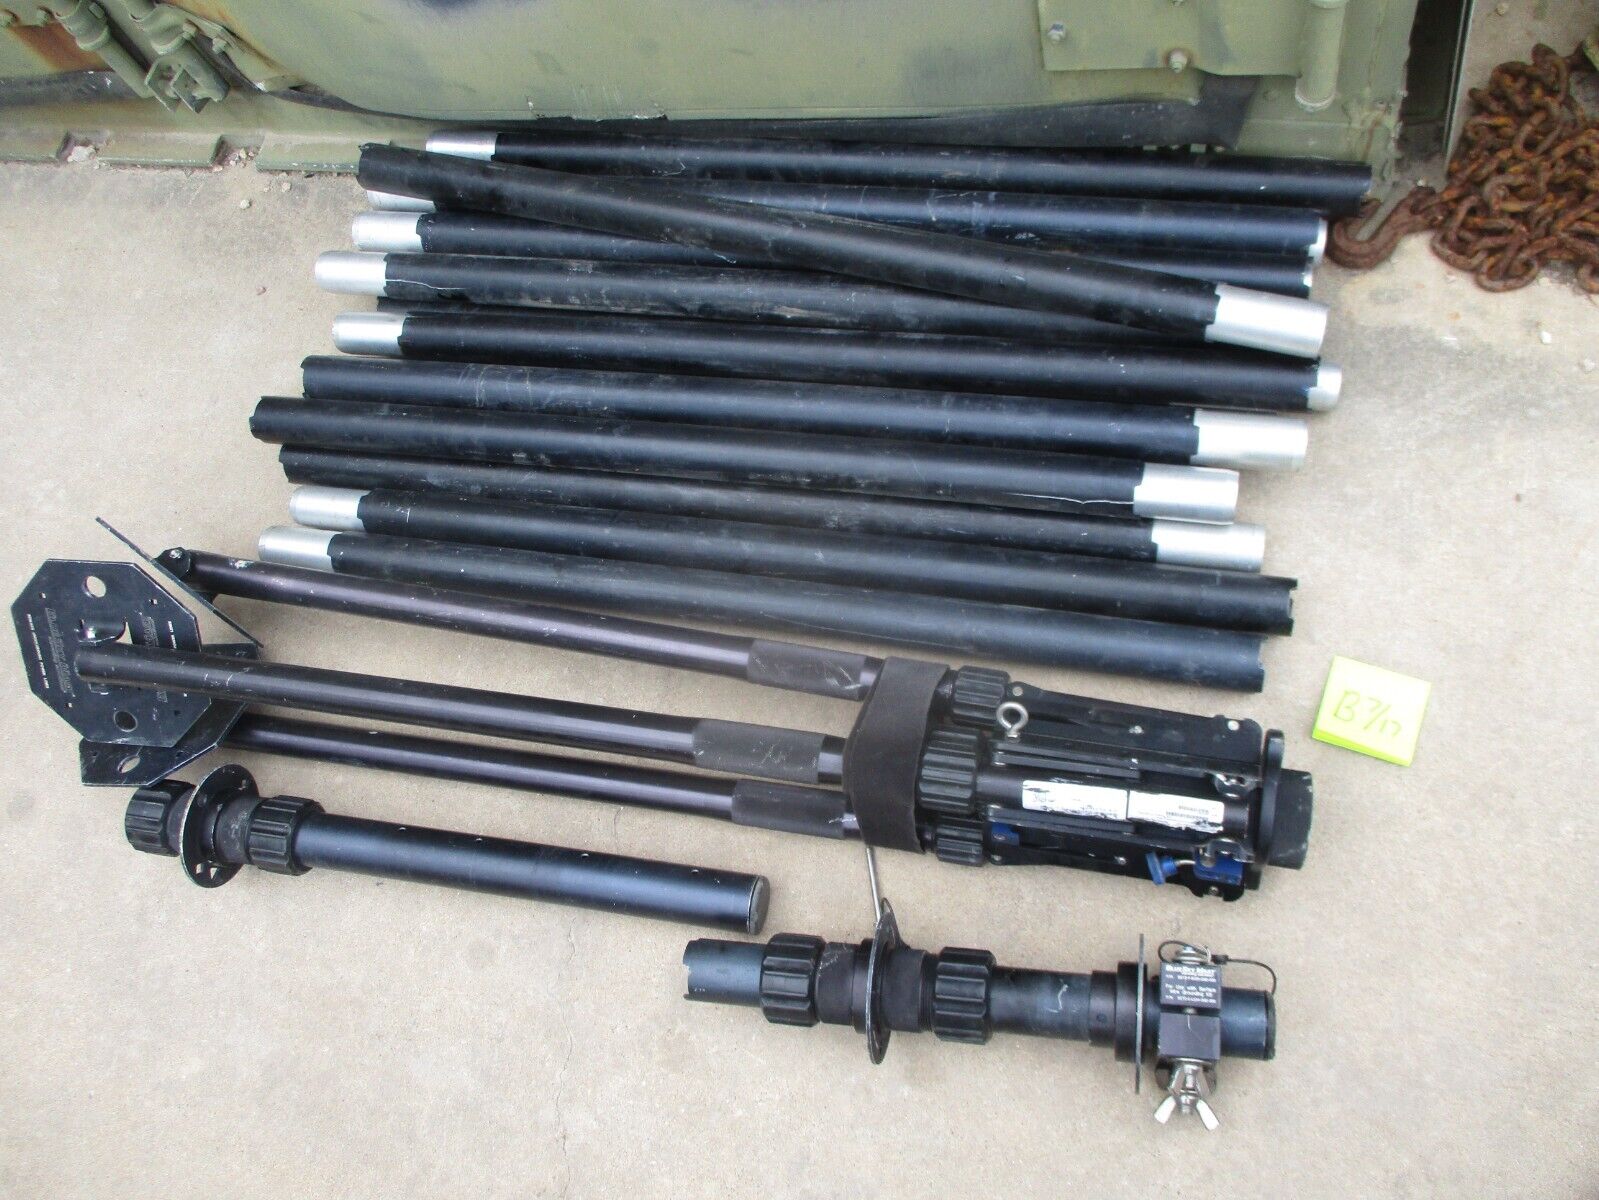 Used Blue Sky Antenna Mast Tripod w/ 18 Mast Sections & 2 Adapters